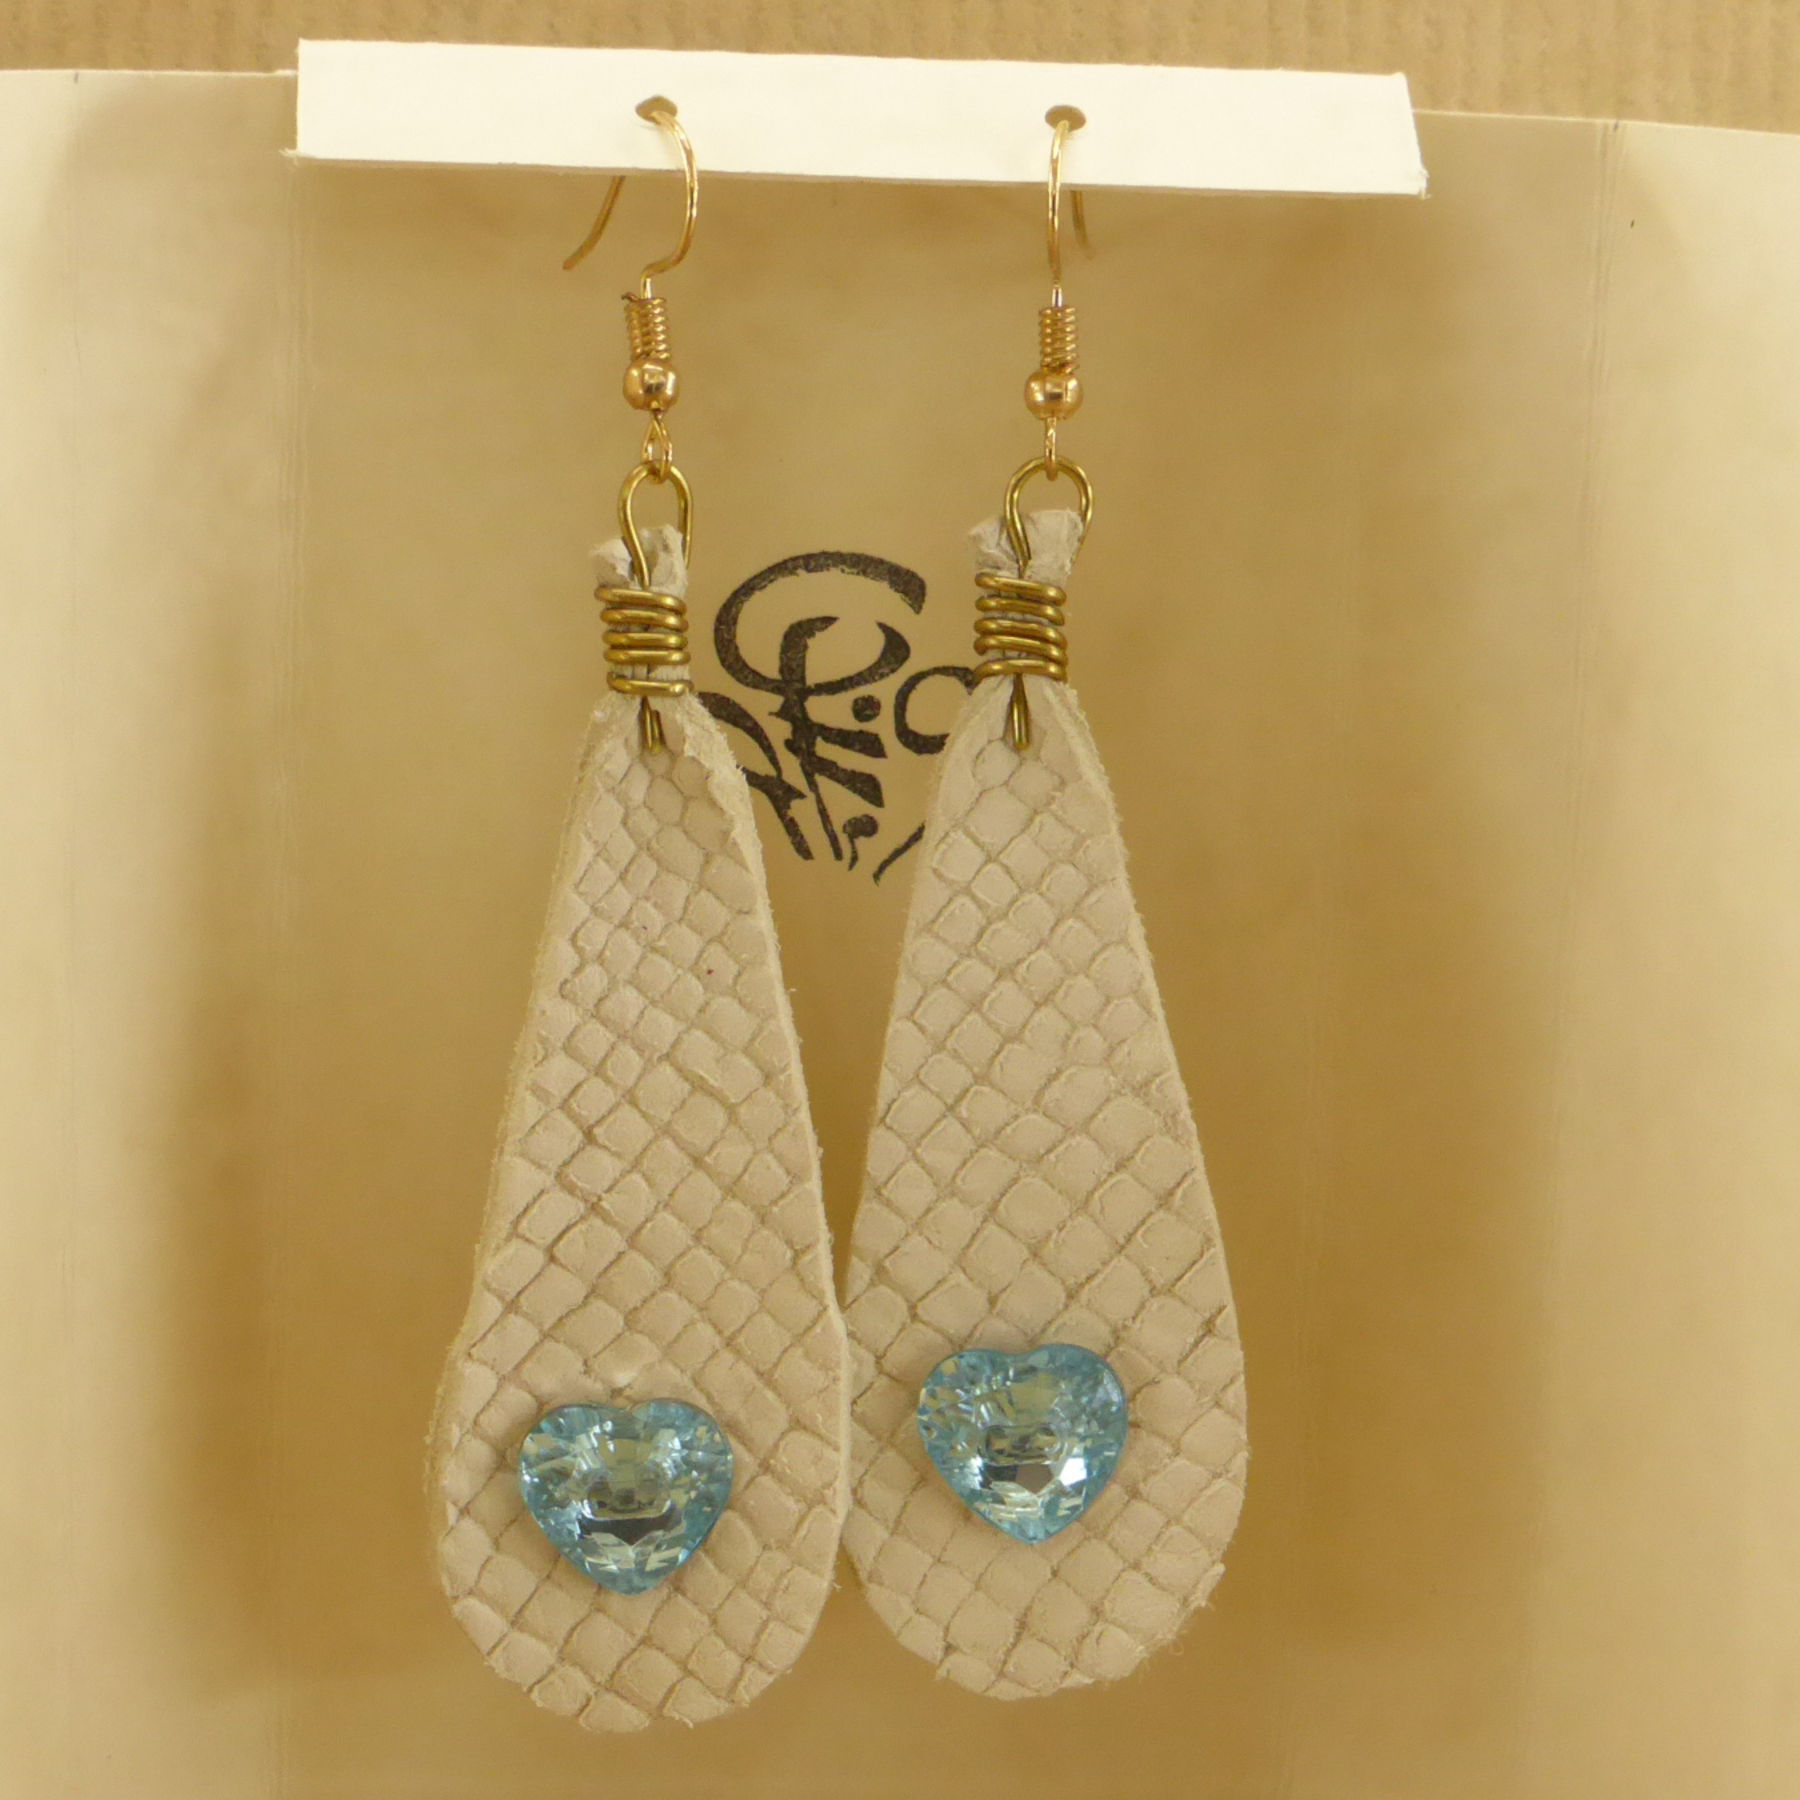 Mesh white leather and blue heart earrings